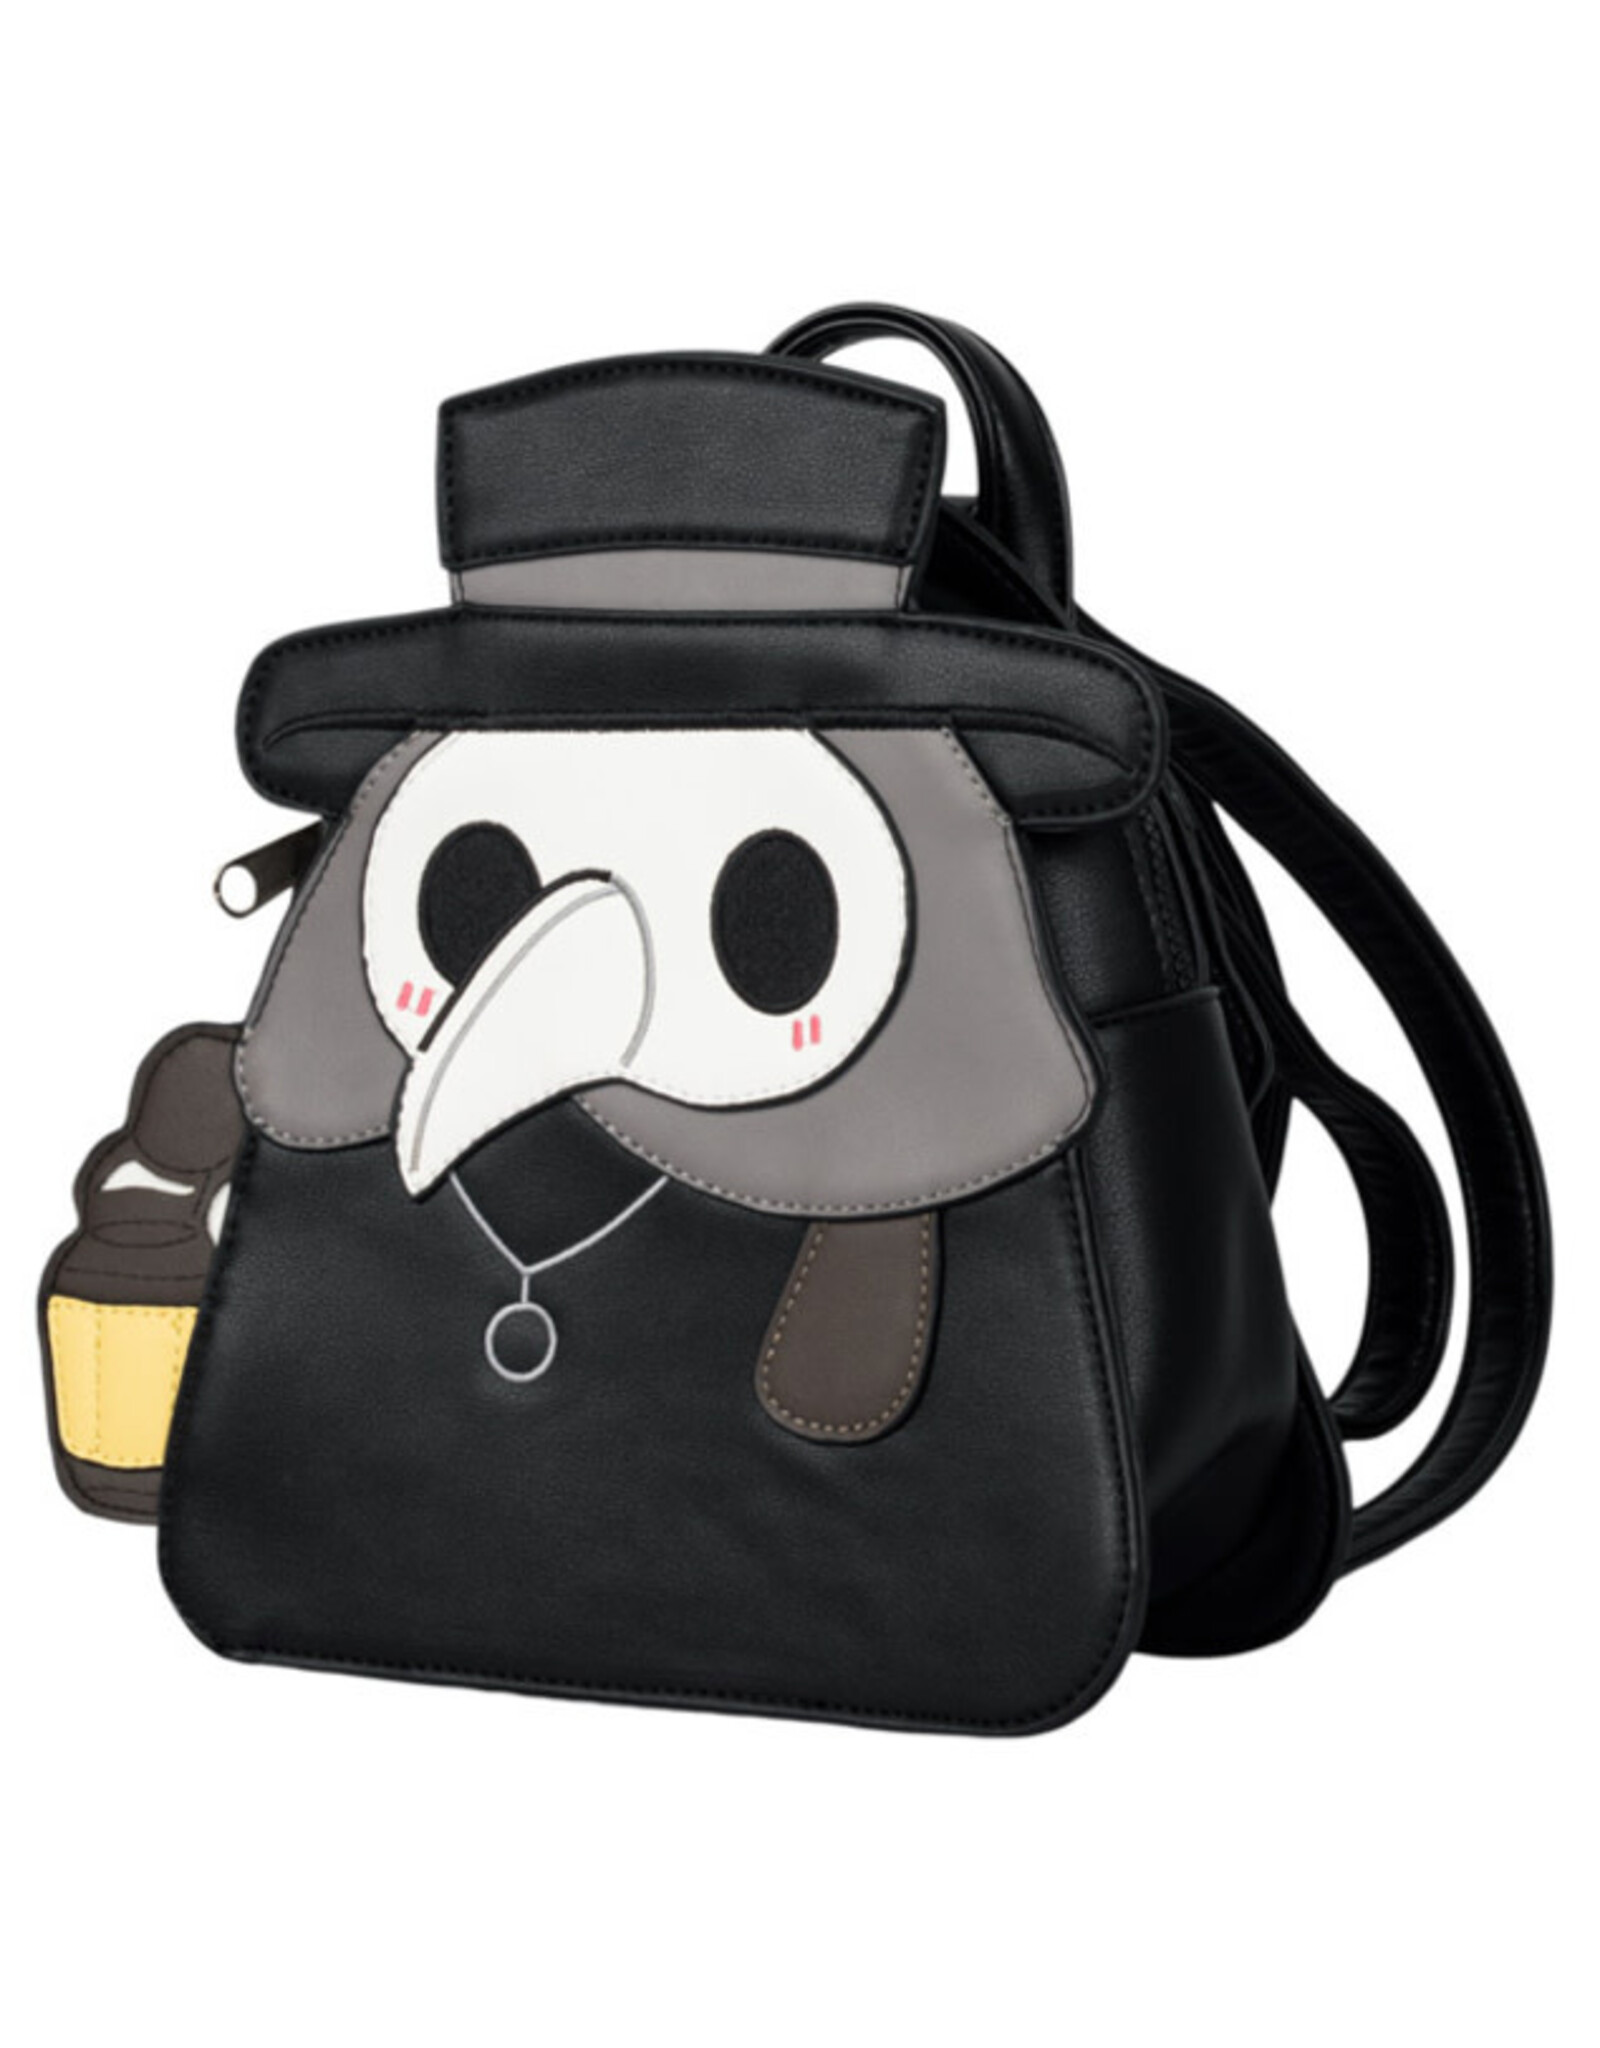 Squishable Squishable Plague Doctor Backpack